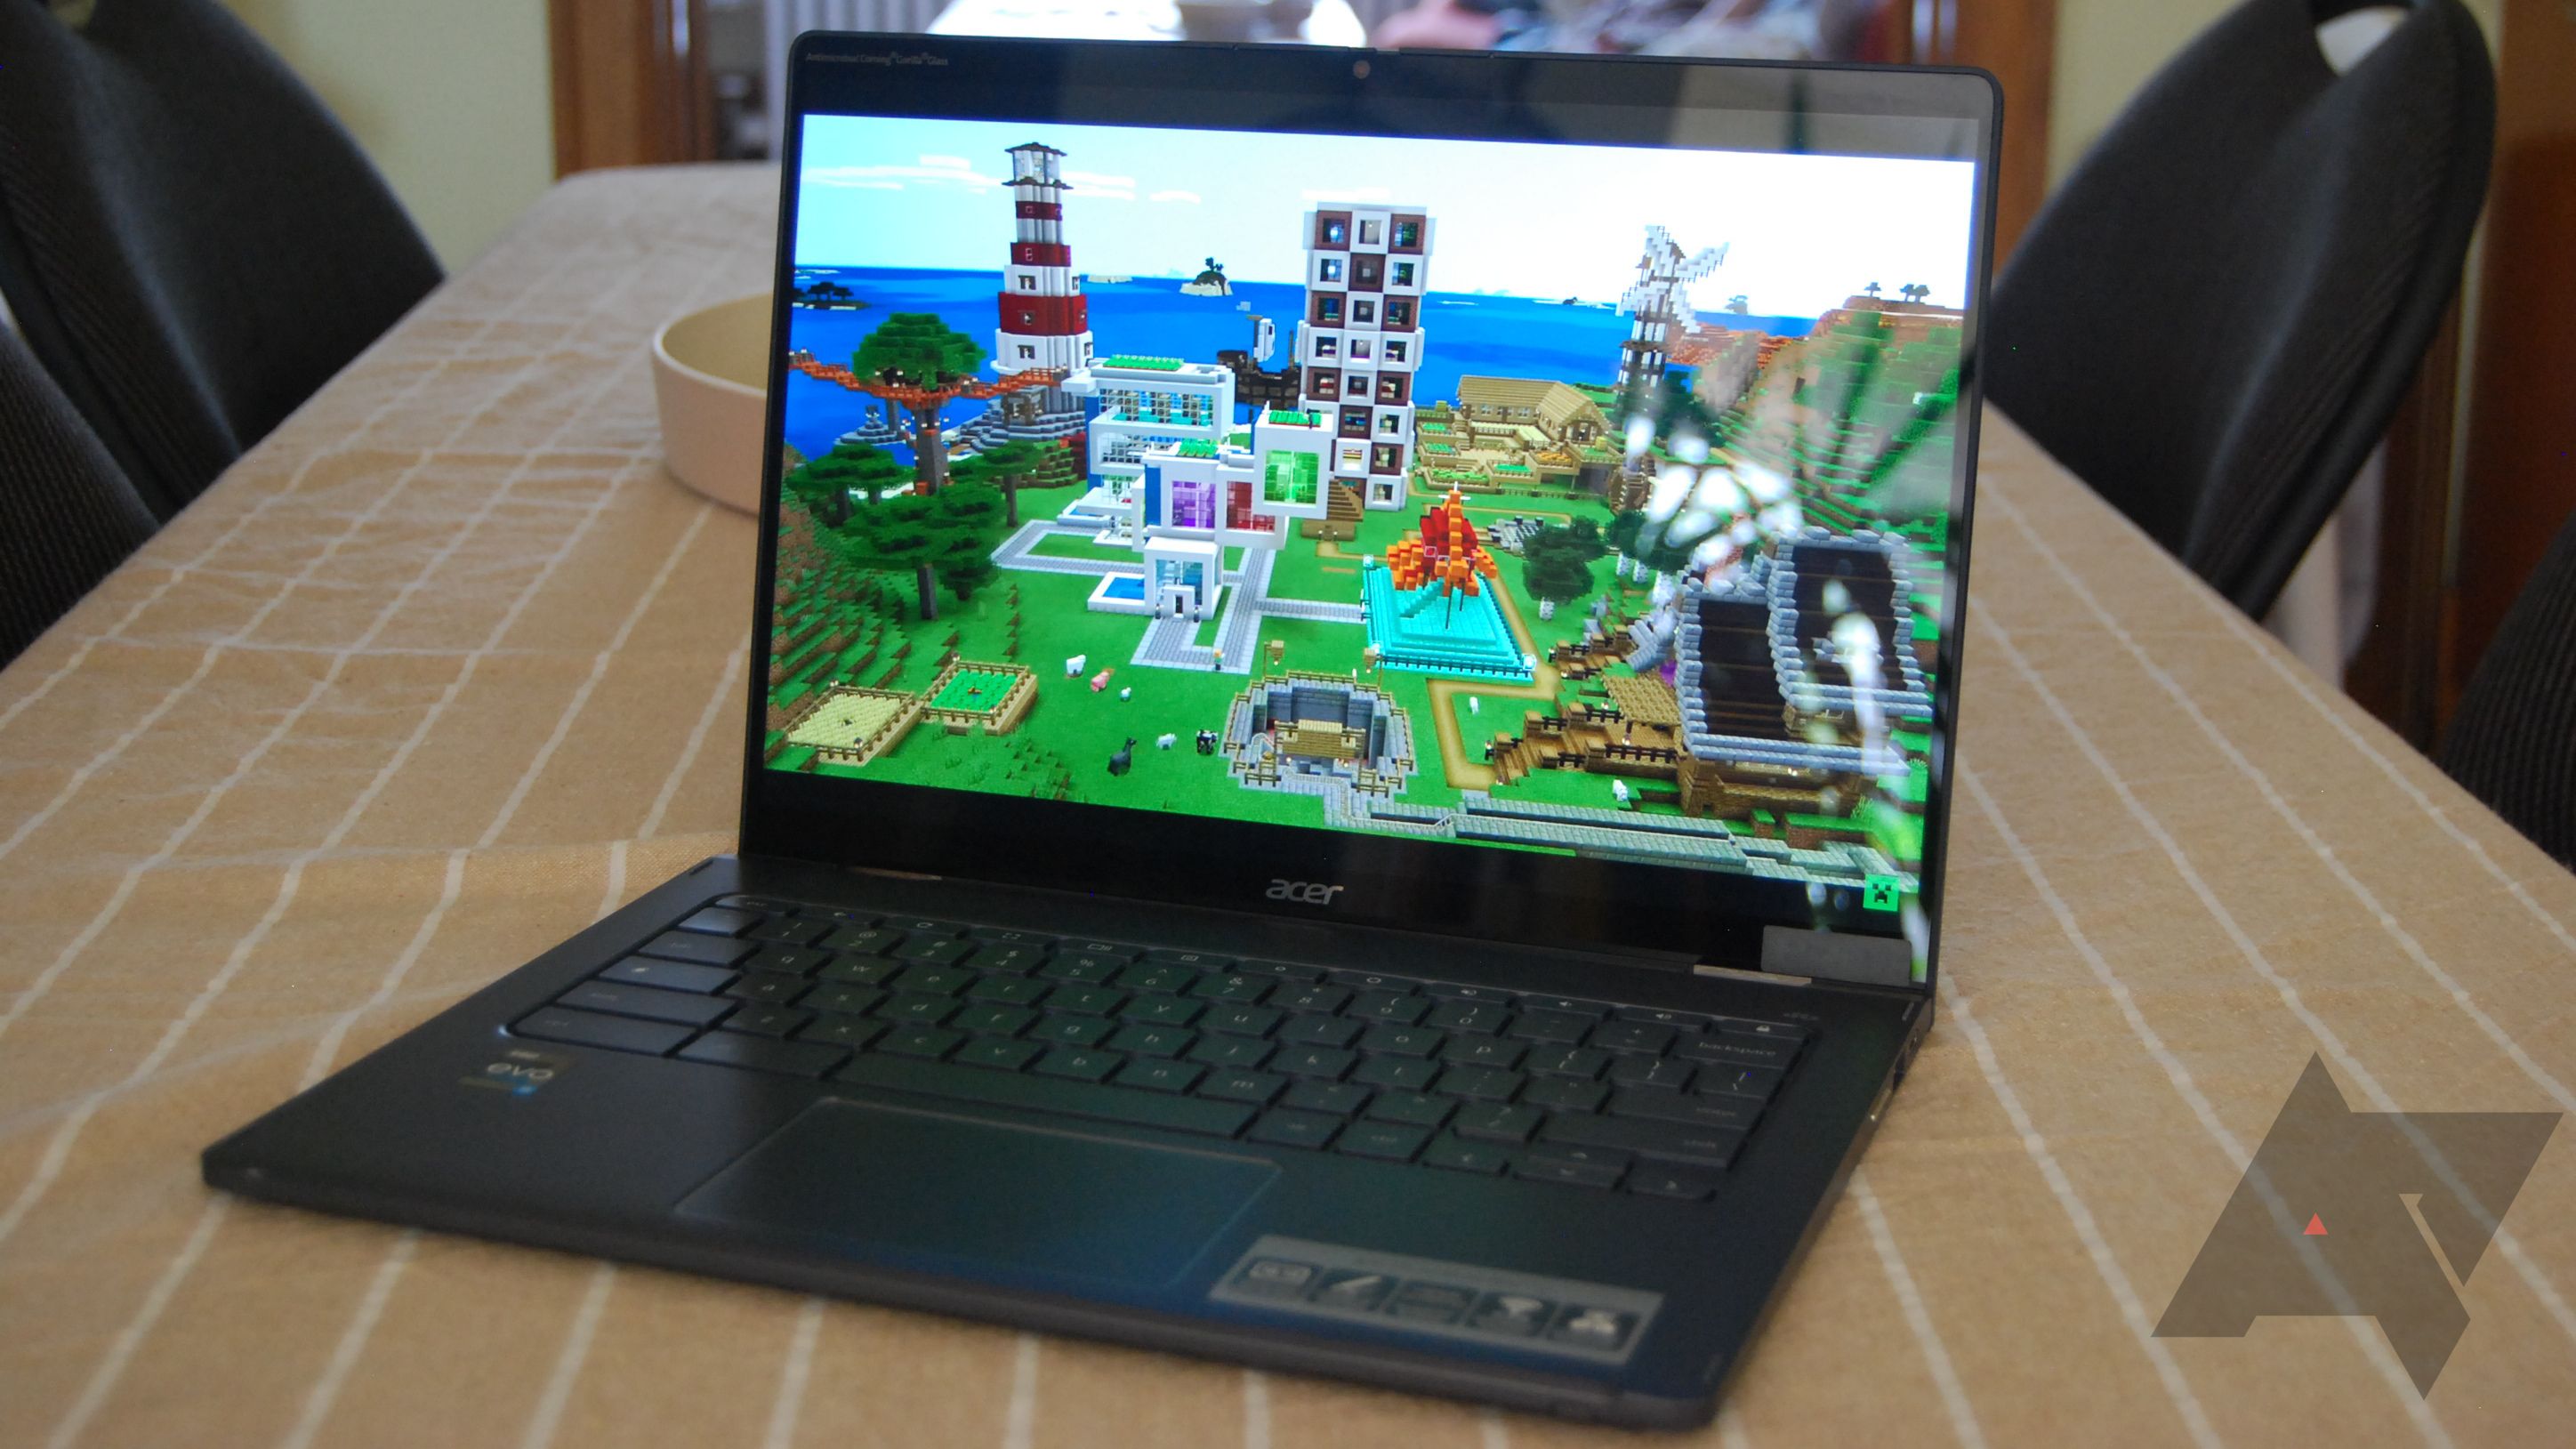 How to Play Minecraft on Your Chromebook